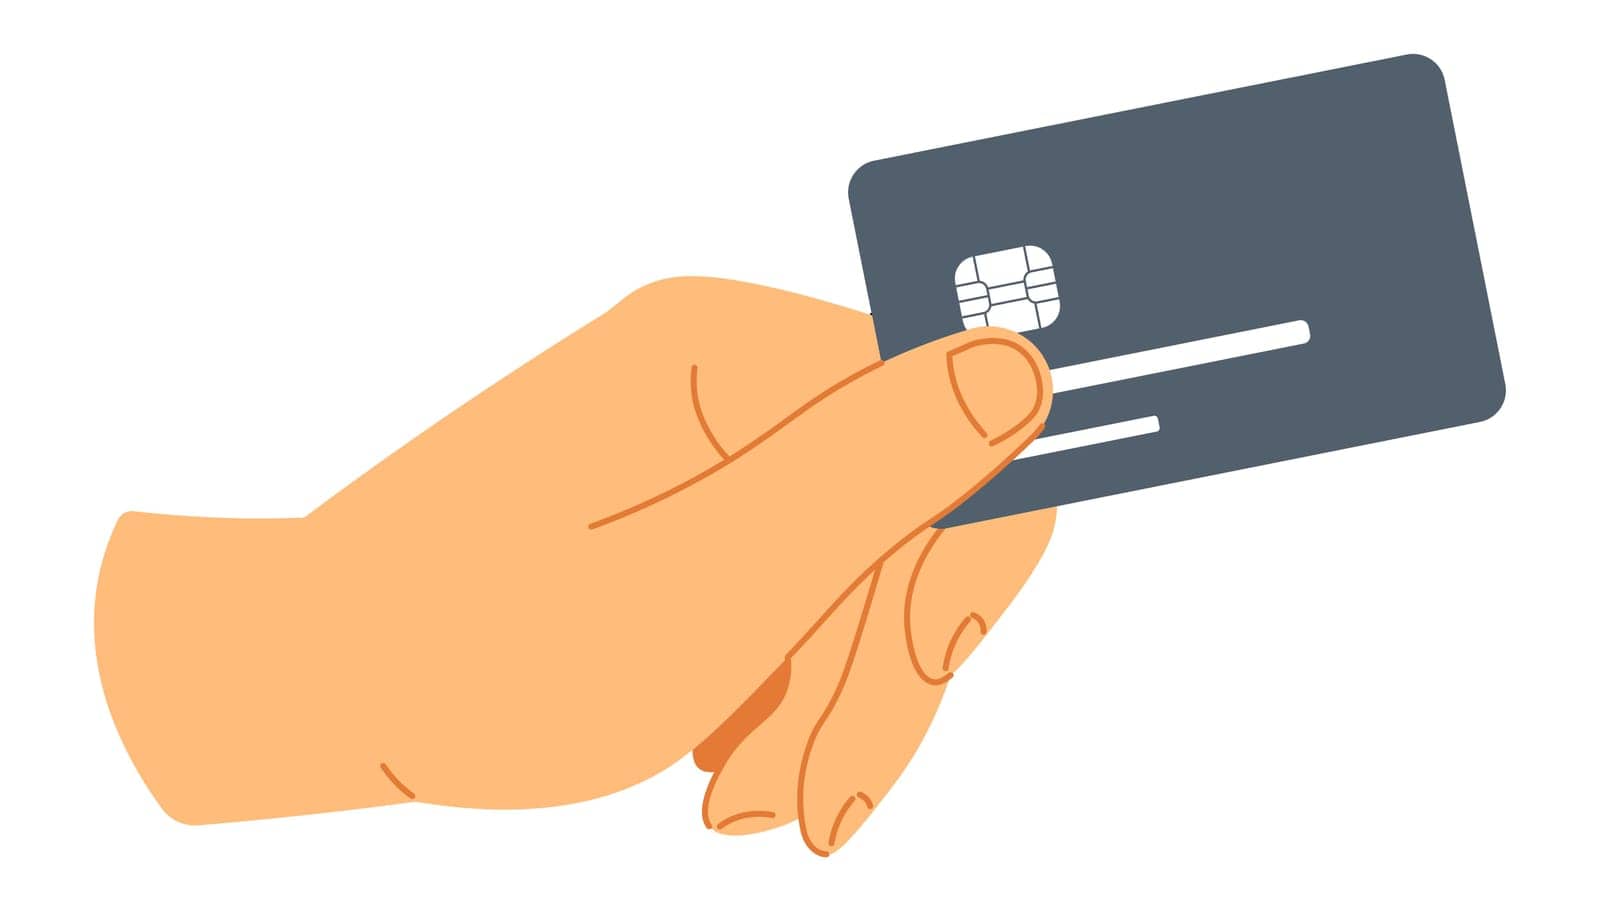 Paying with credit card, virtual financial assets by Sonulkaster